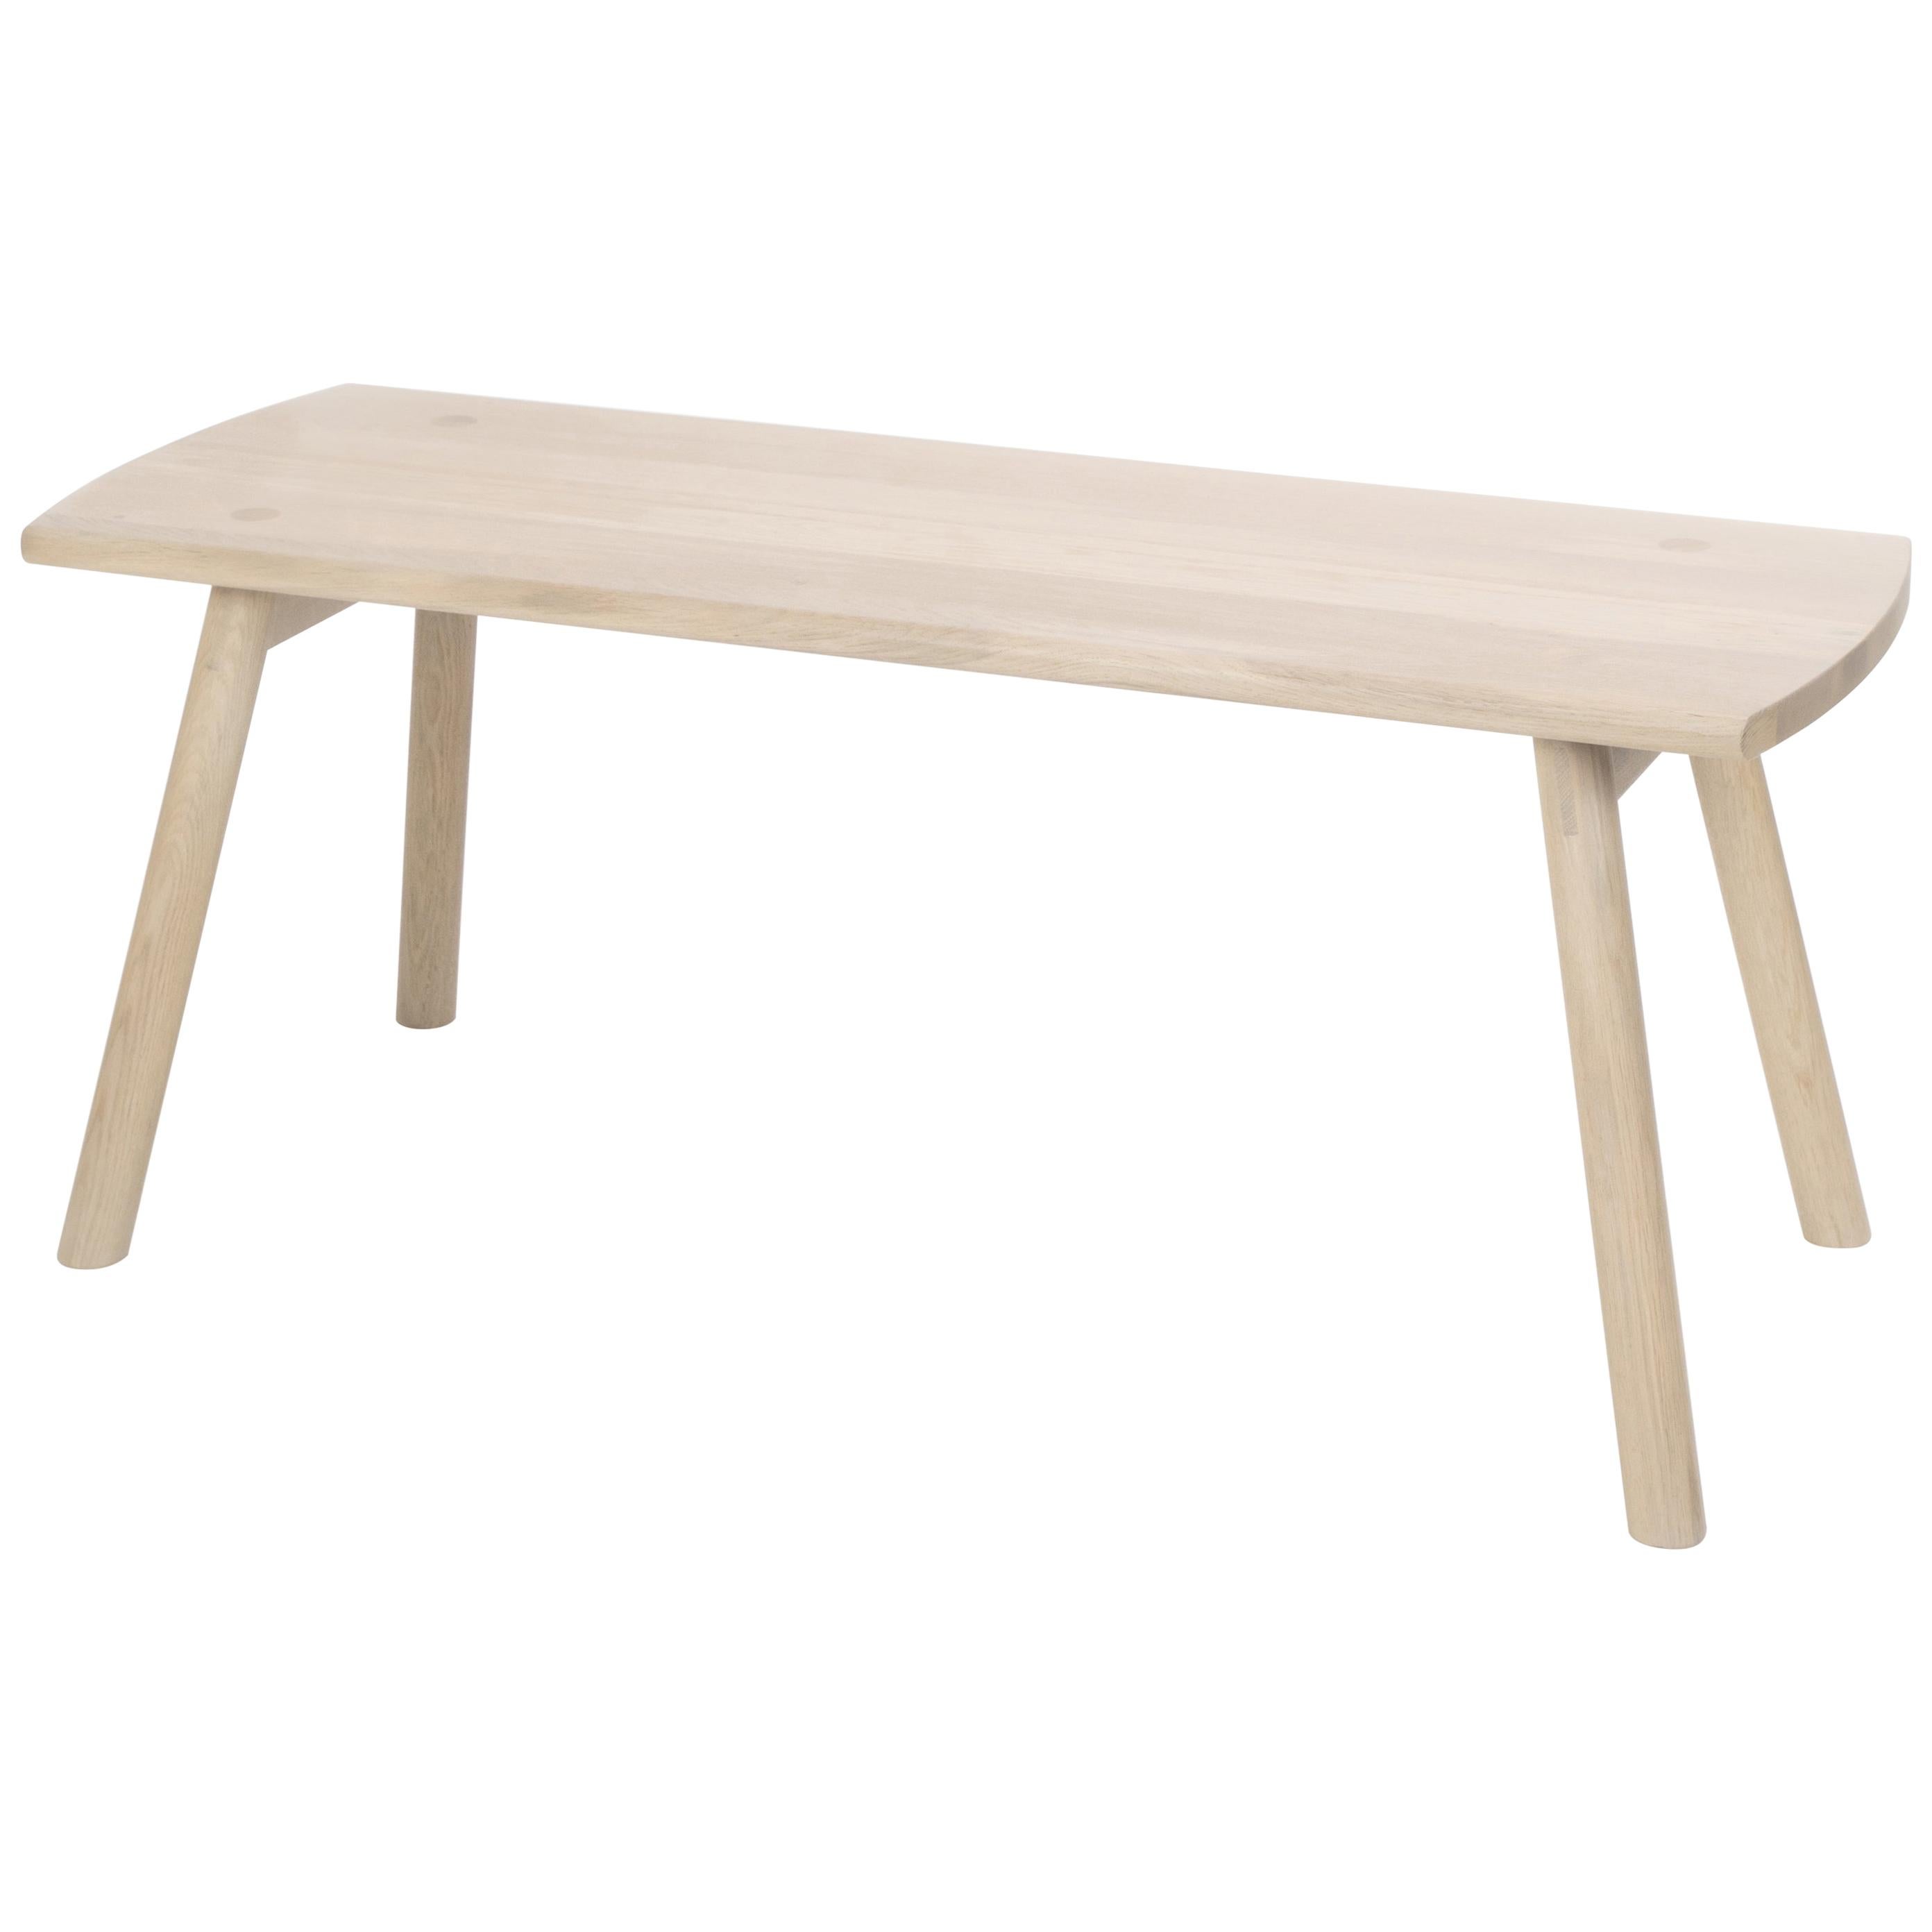 Sol Bench by Sun at Six, Nude Minimalist Bench in Oak Wood